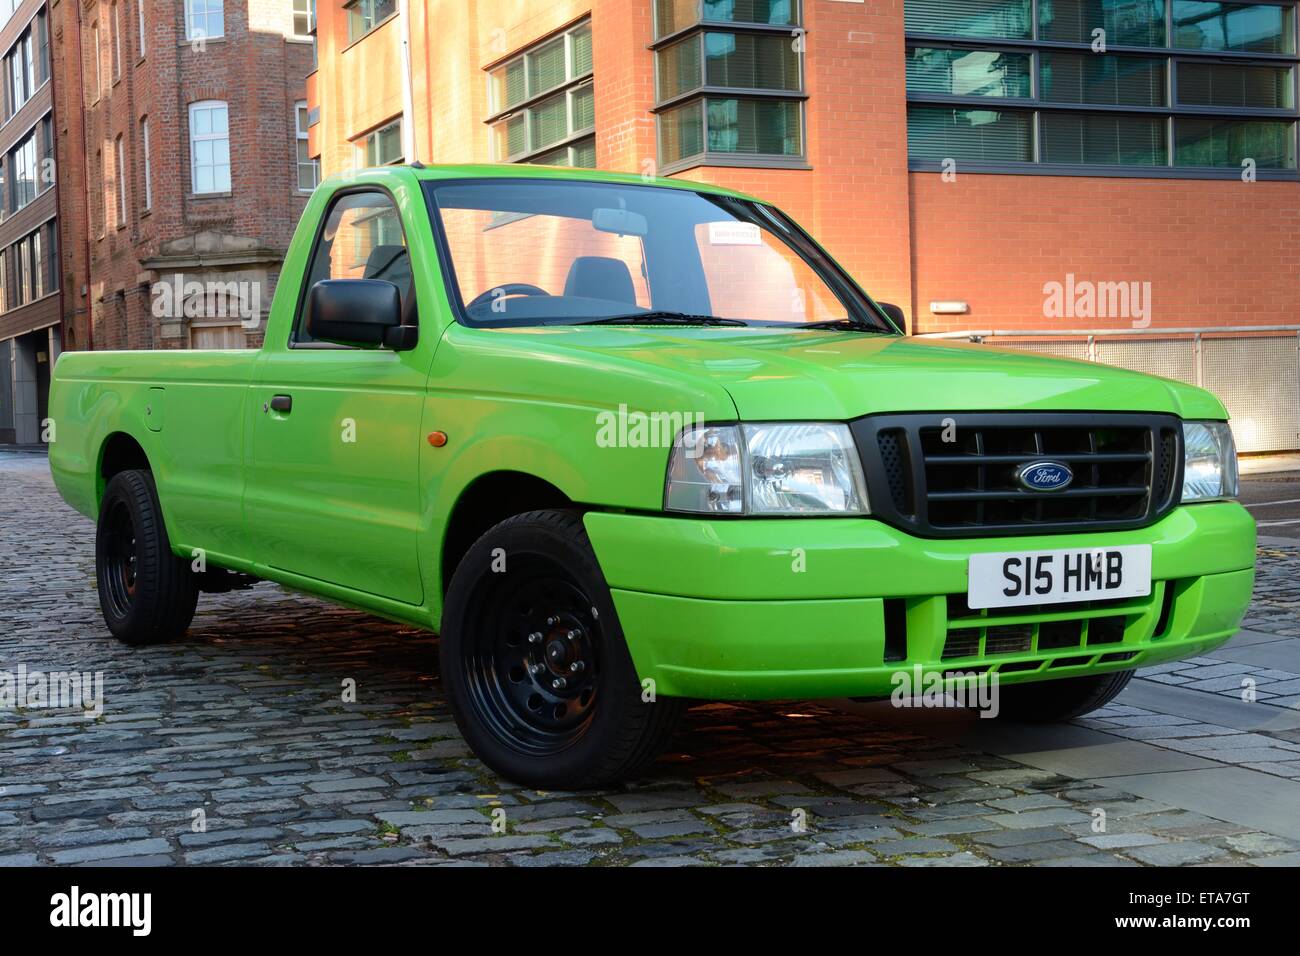 Ford Ranger pickup in Ancoats, Manchester. Stock Photo